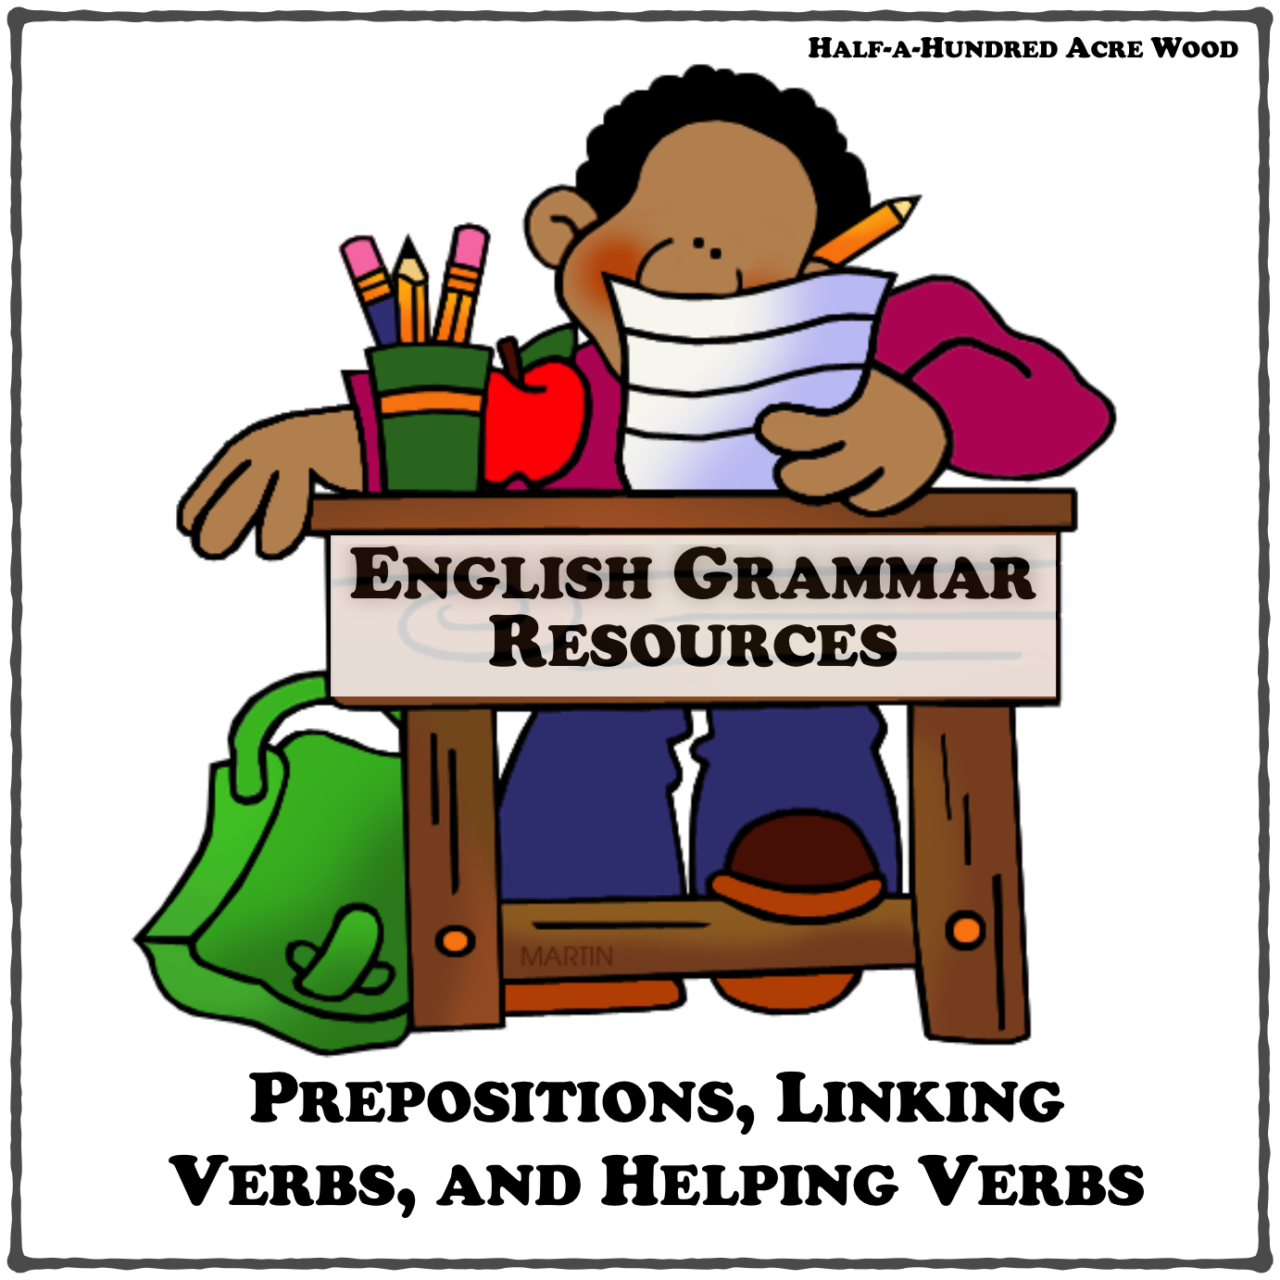 English Grammar Resources Prepositions Linking Helping Verbs Half A Hundred Acre Wood